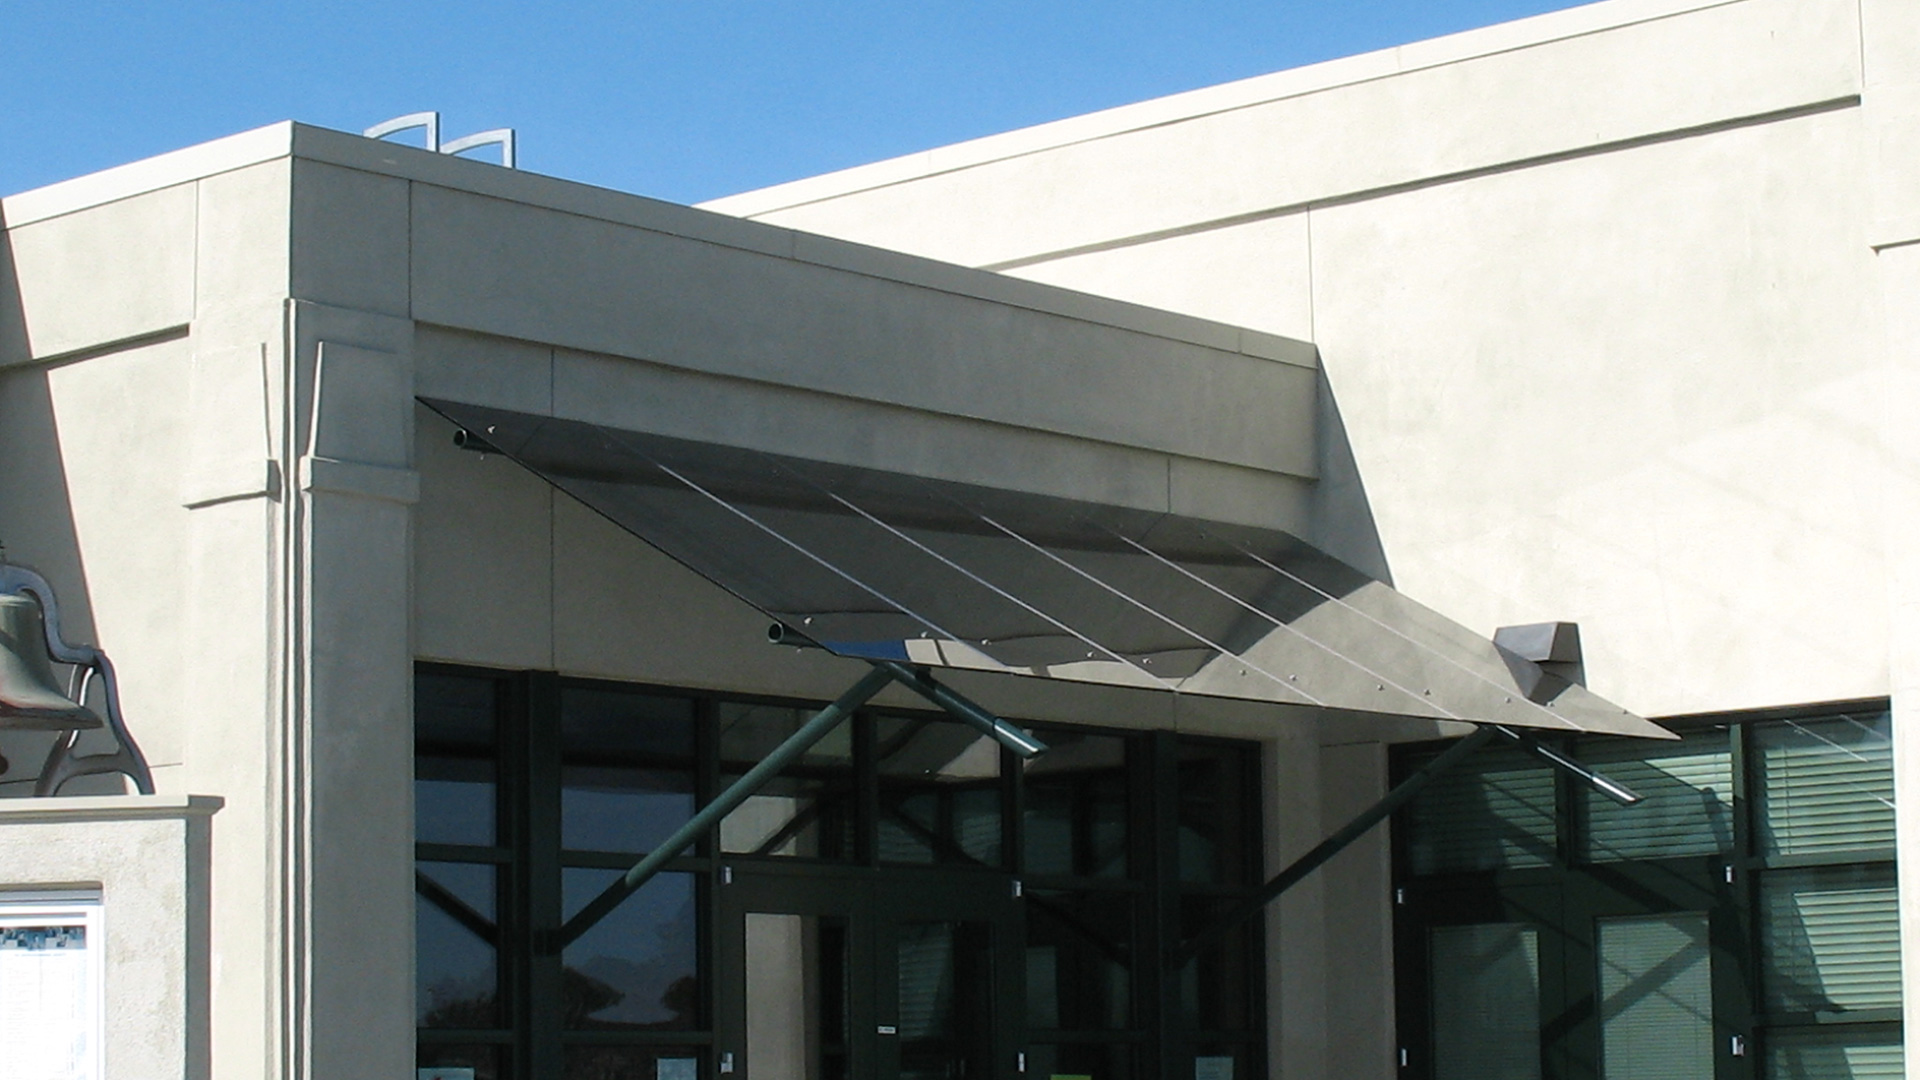 Entrance to district office, with glass awning above door.